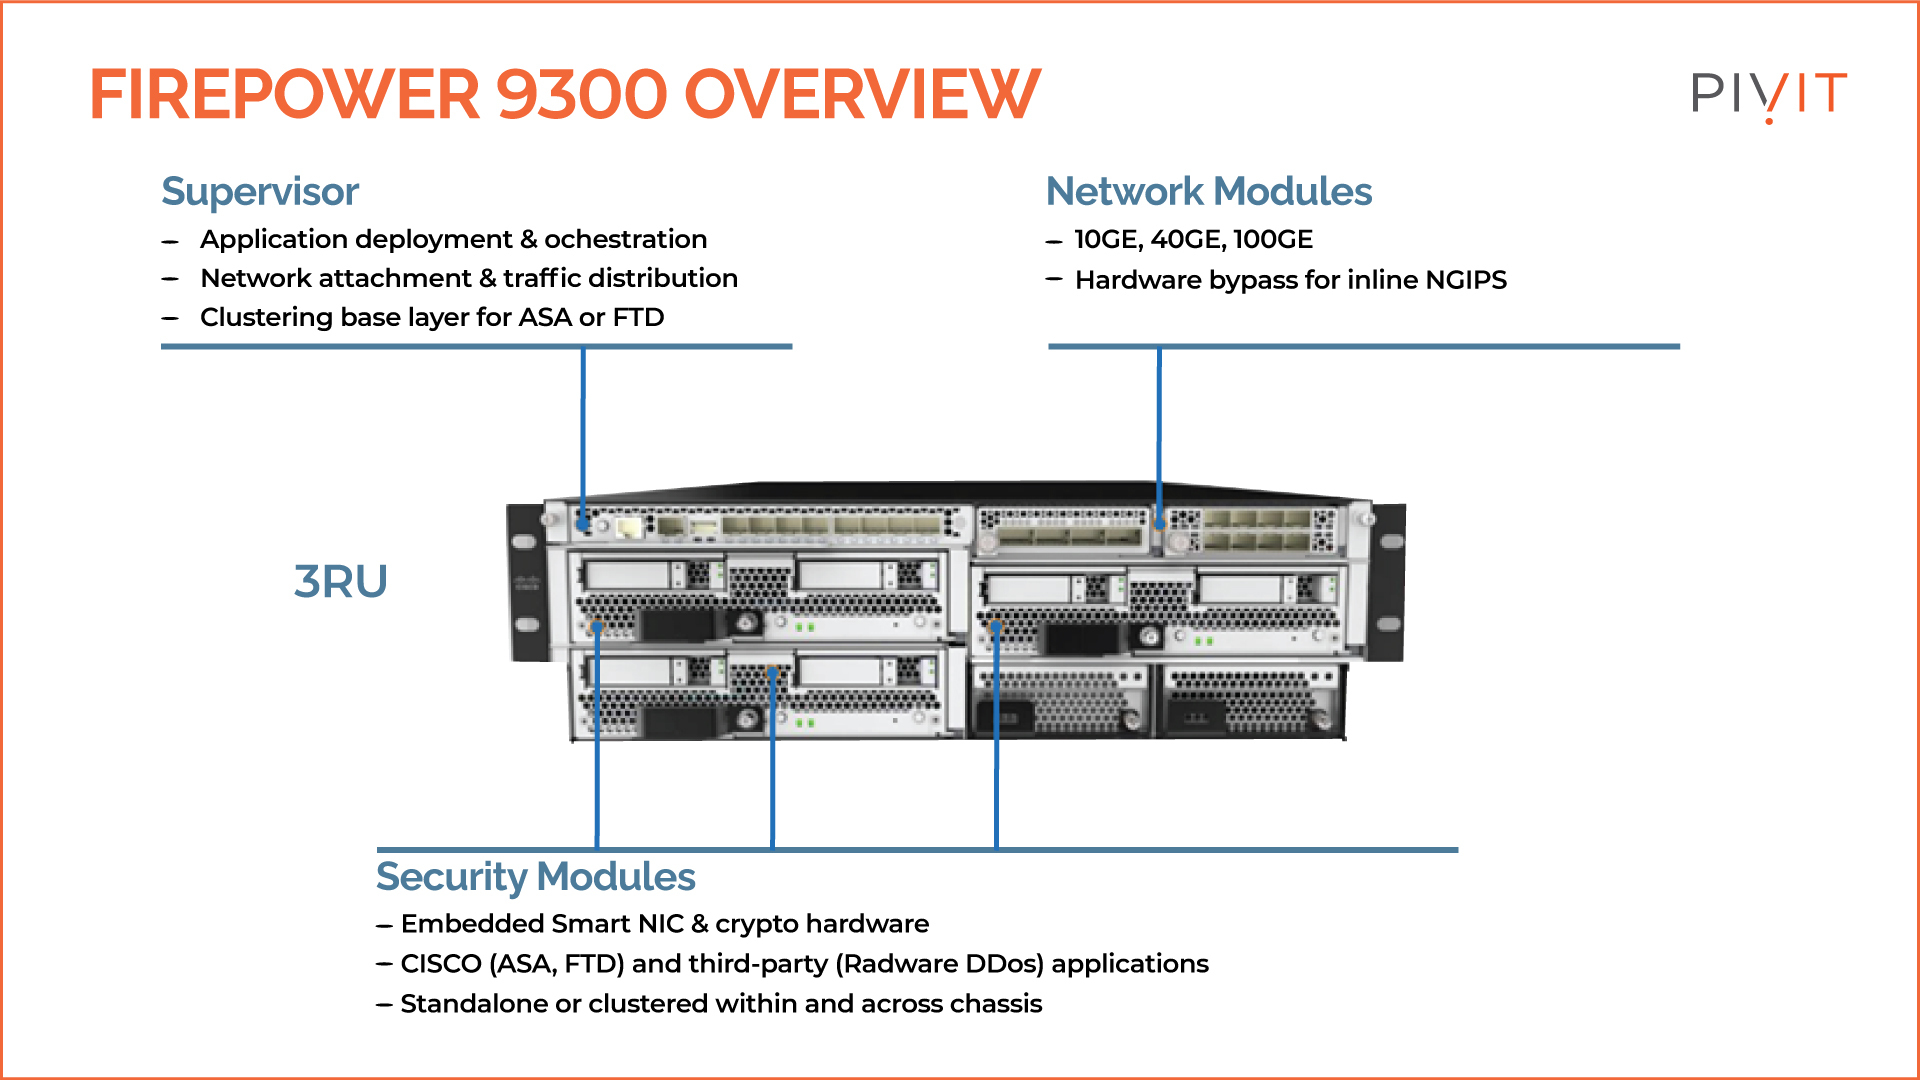 Firepower 9300 overview displaying the various security and network modules